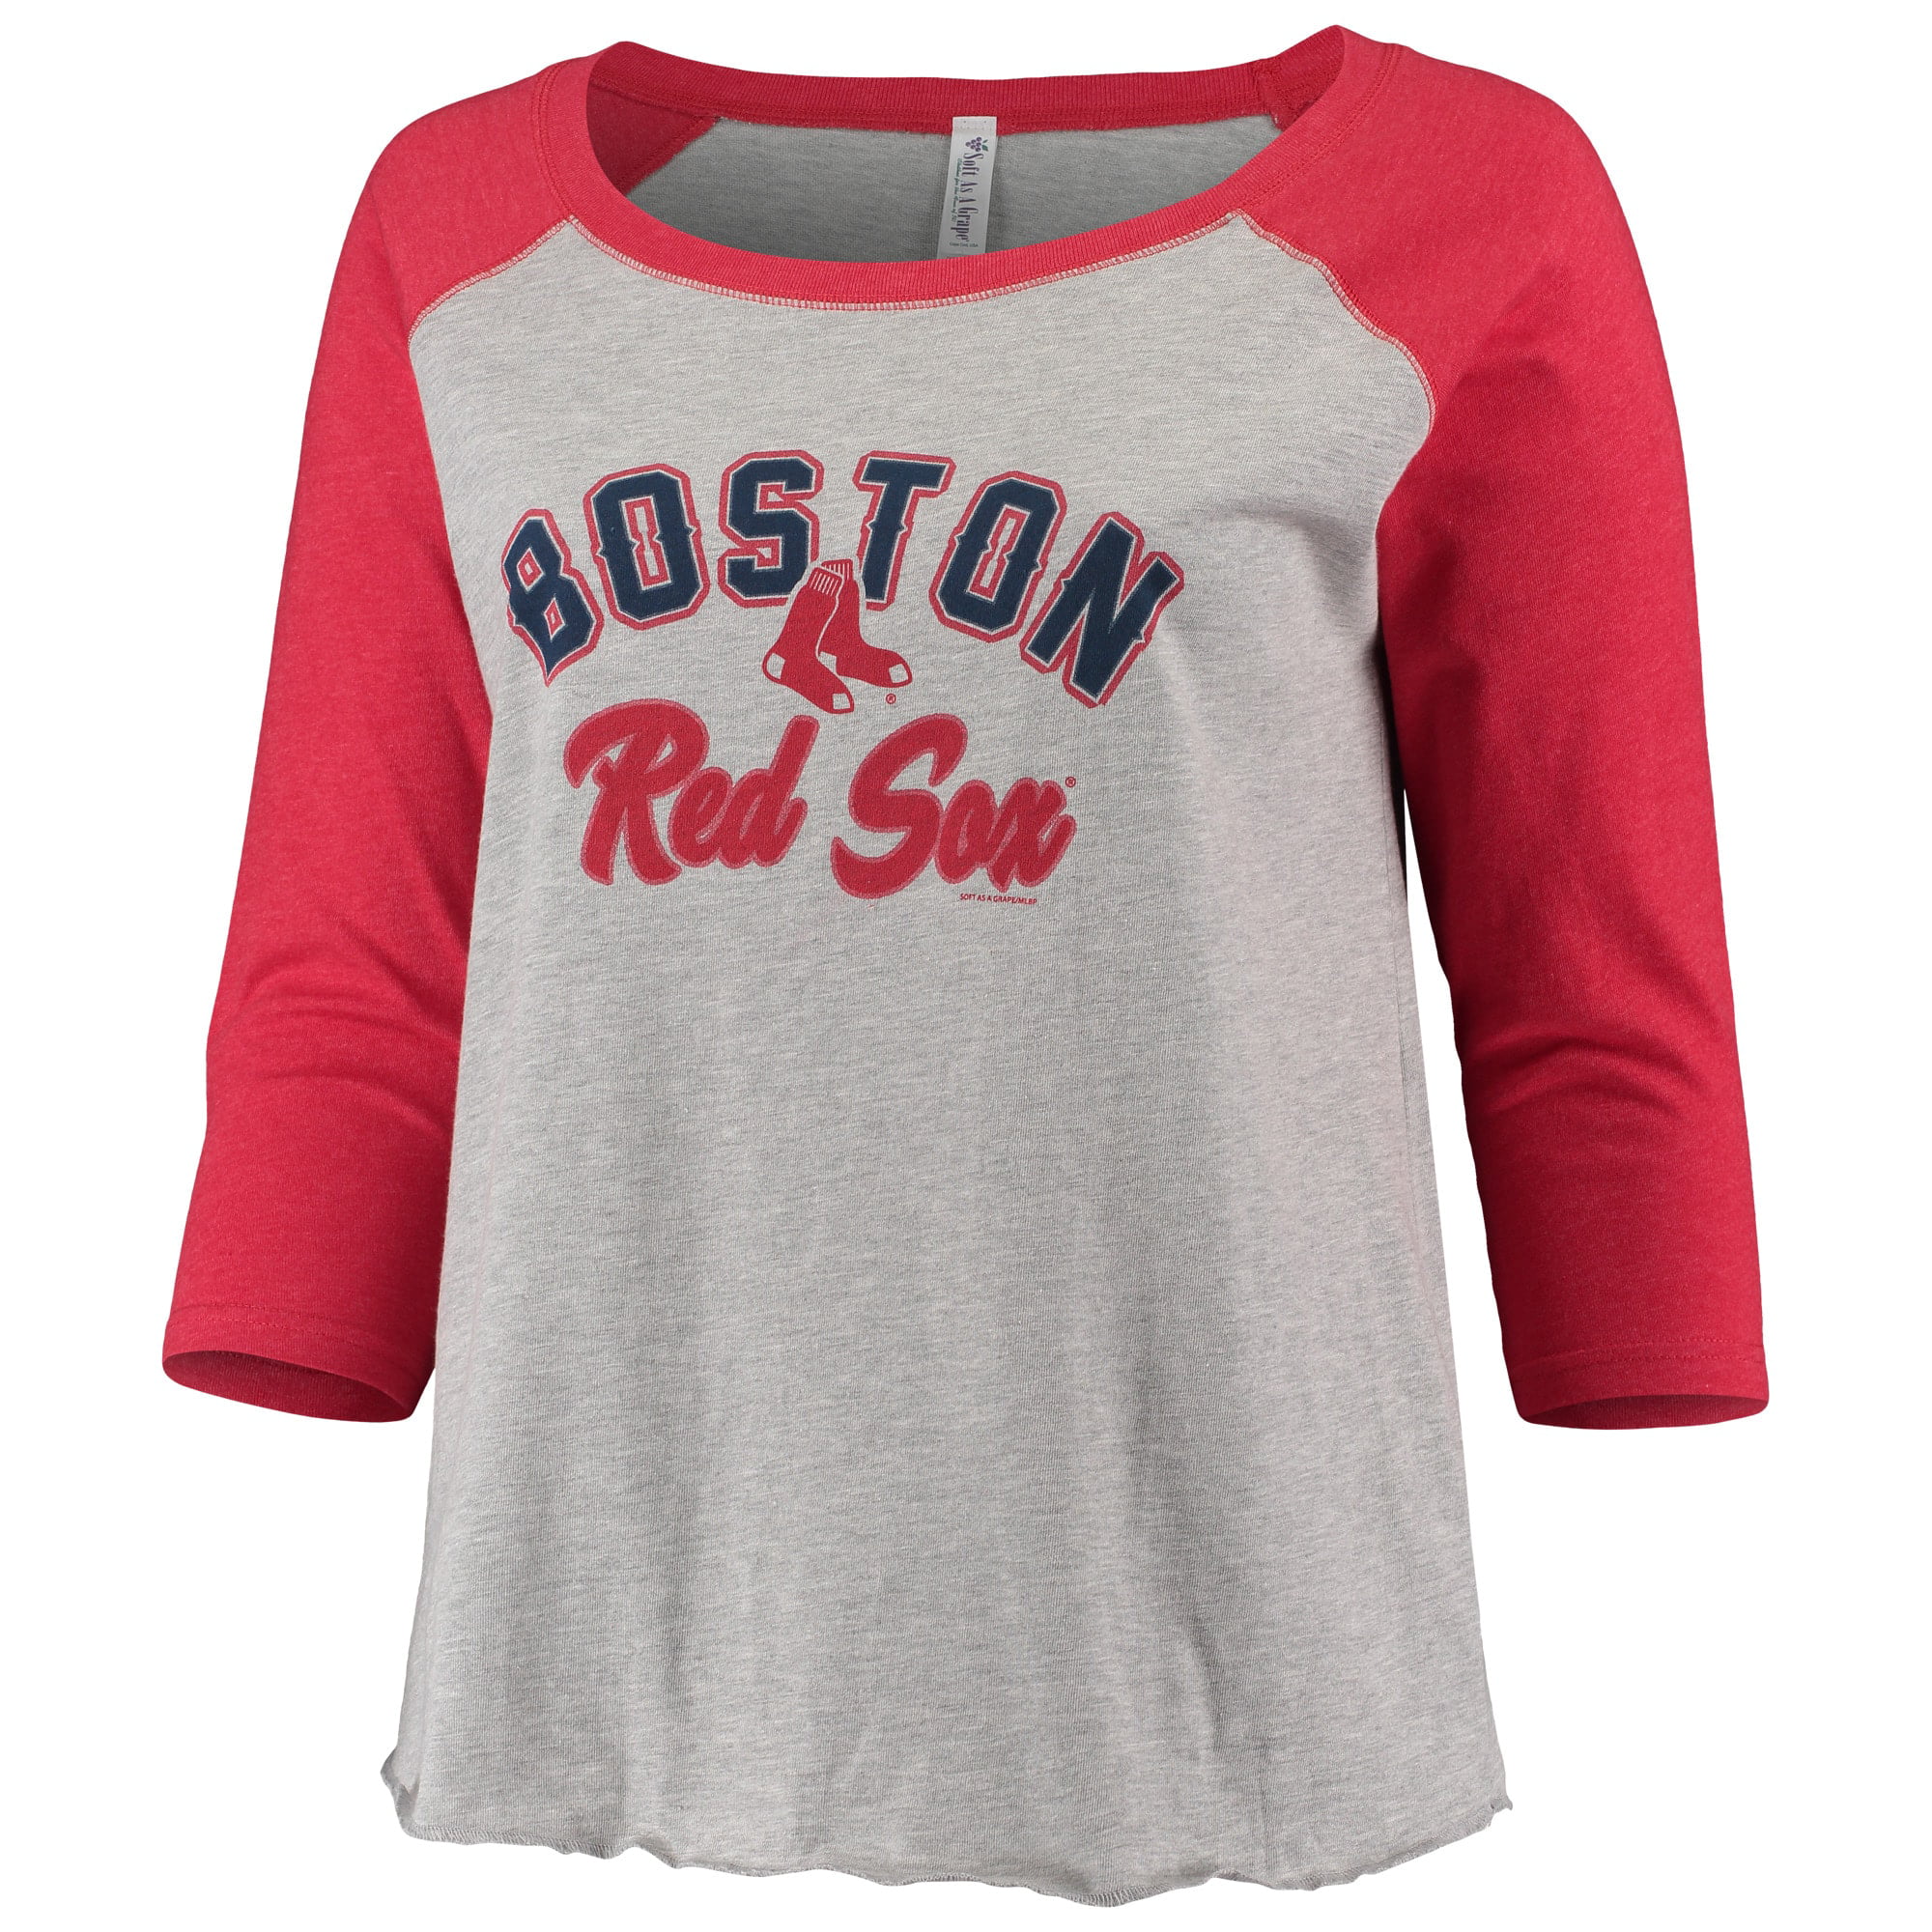 Women's Soft as a Grape Heathered Gray/Red Boston Red Sox Plus